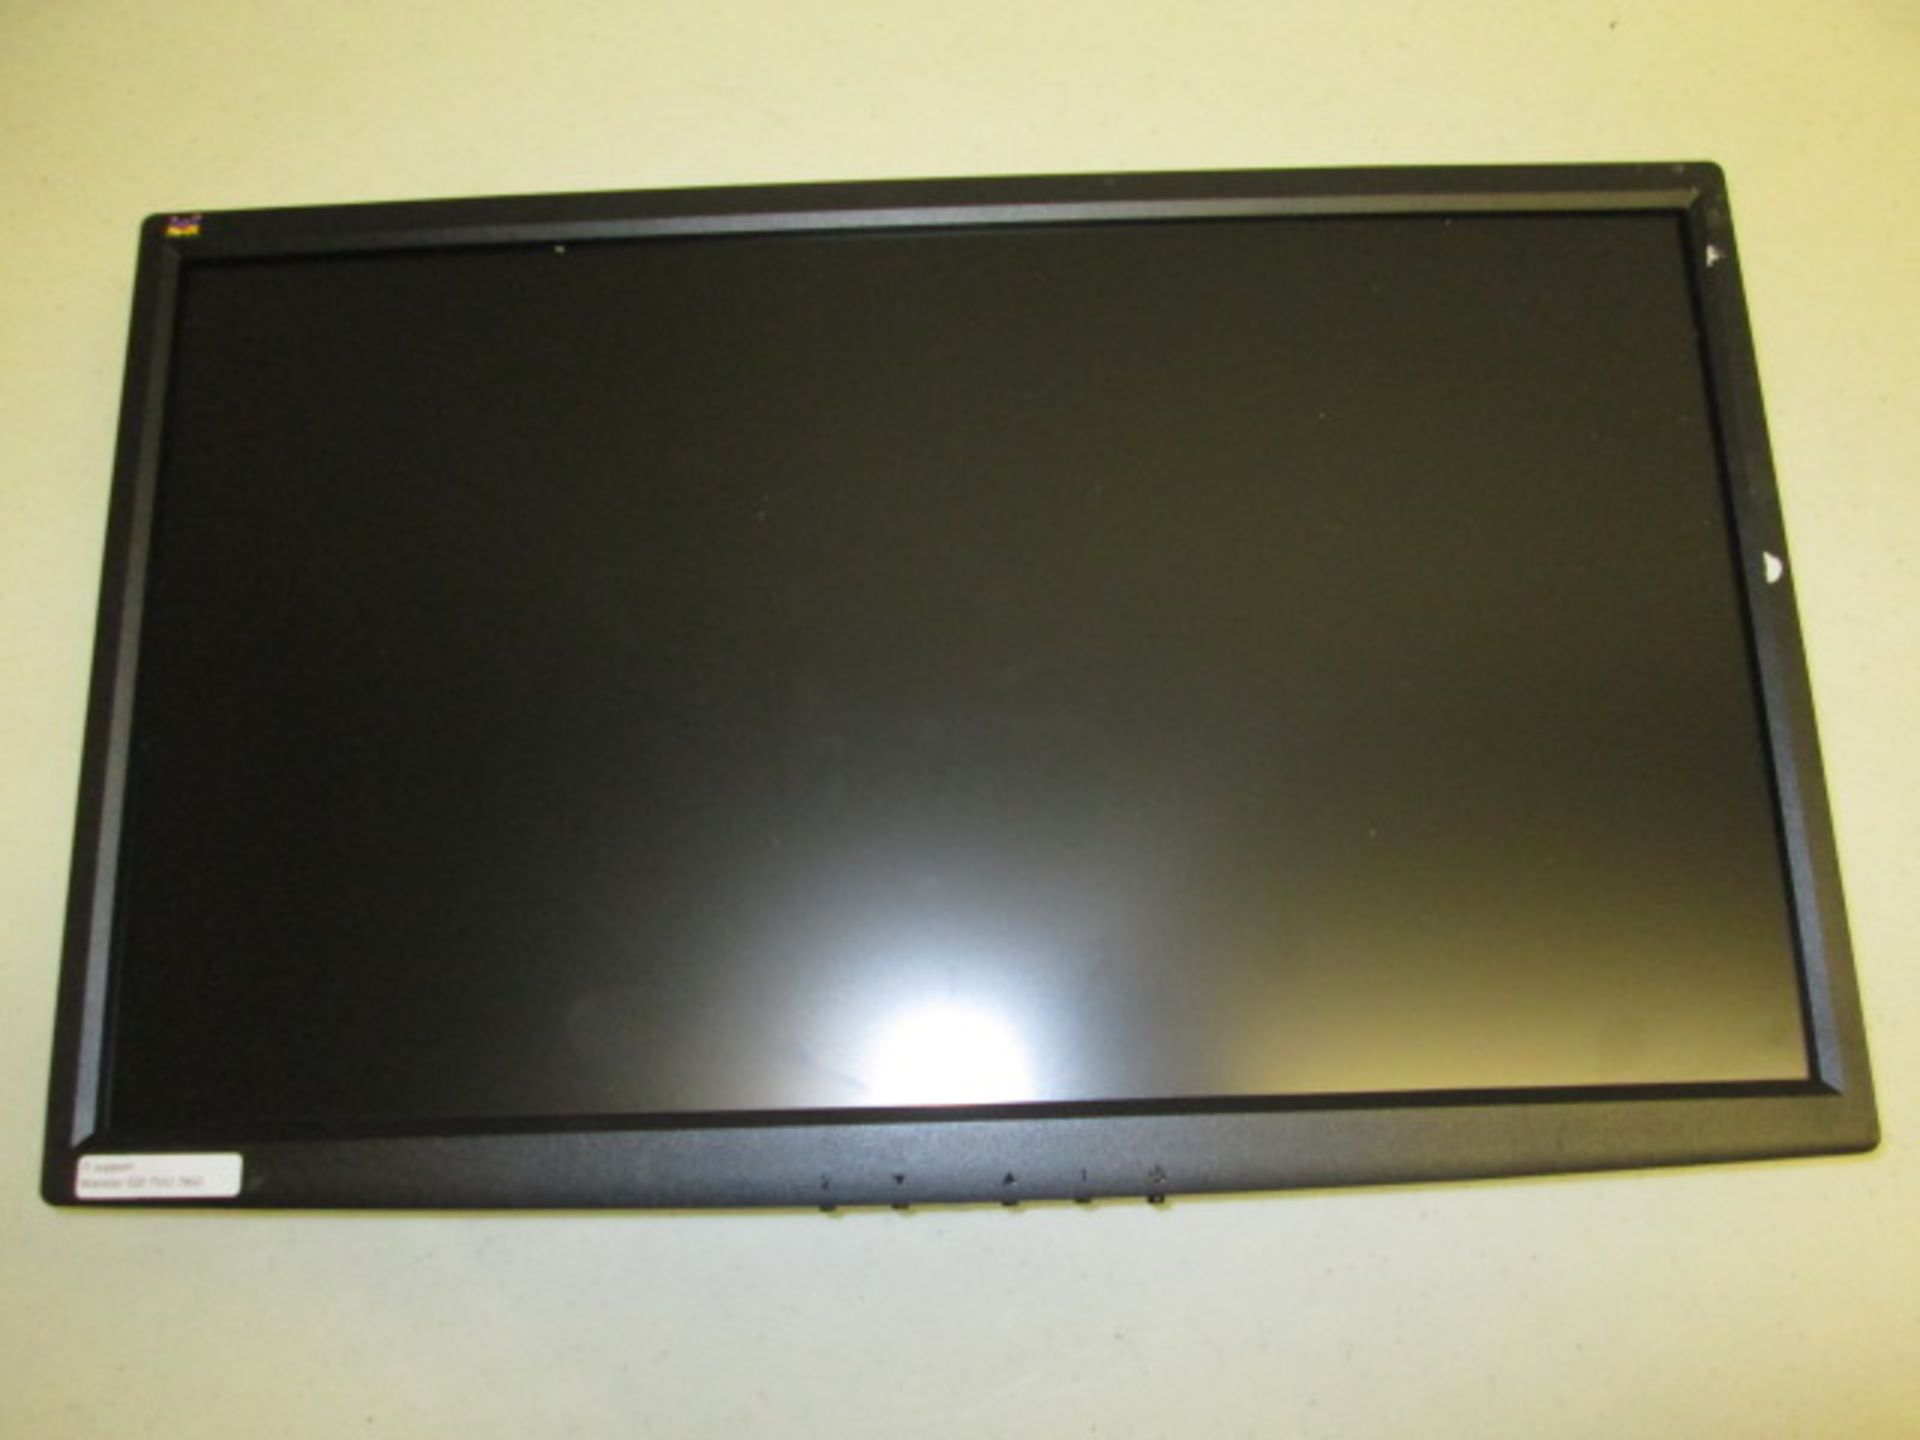 Viewsonic 21.5" Widescreen LCD Monitor. Model VG2233-LED. With VGA Cable & Power Supply. (No Stand)